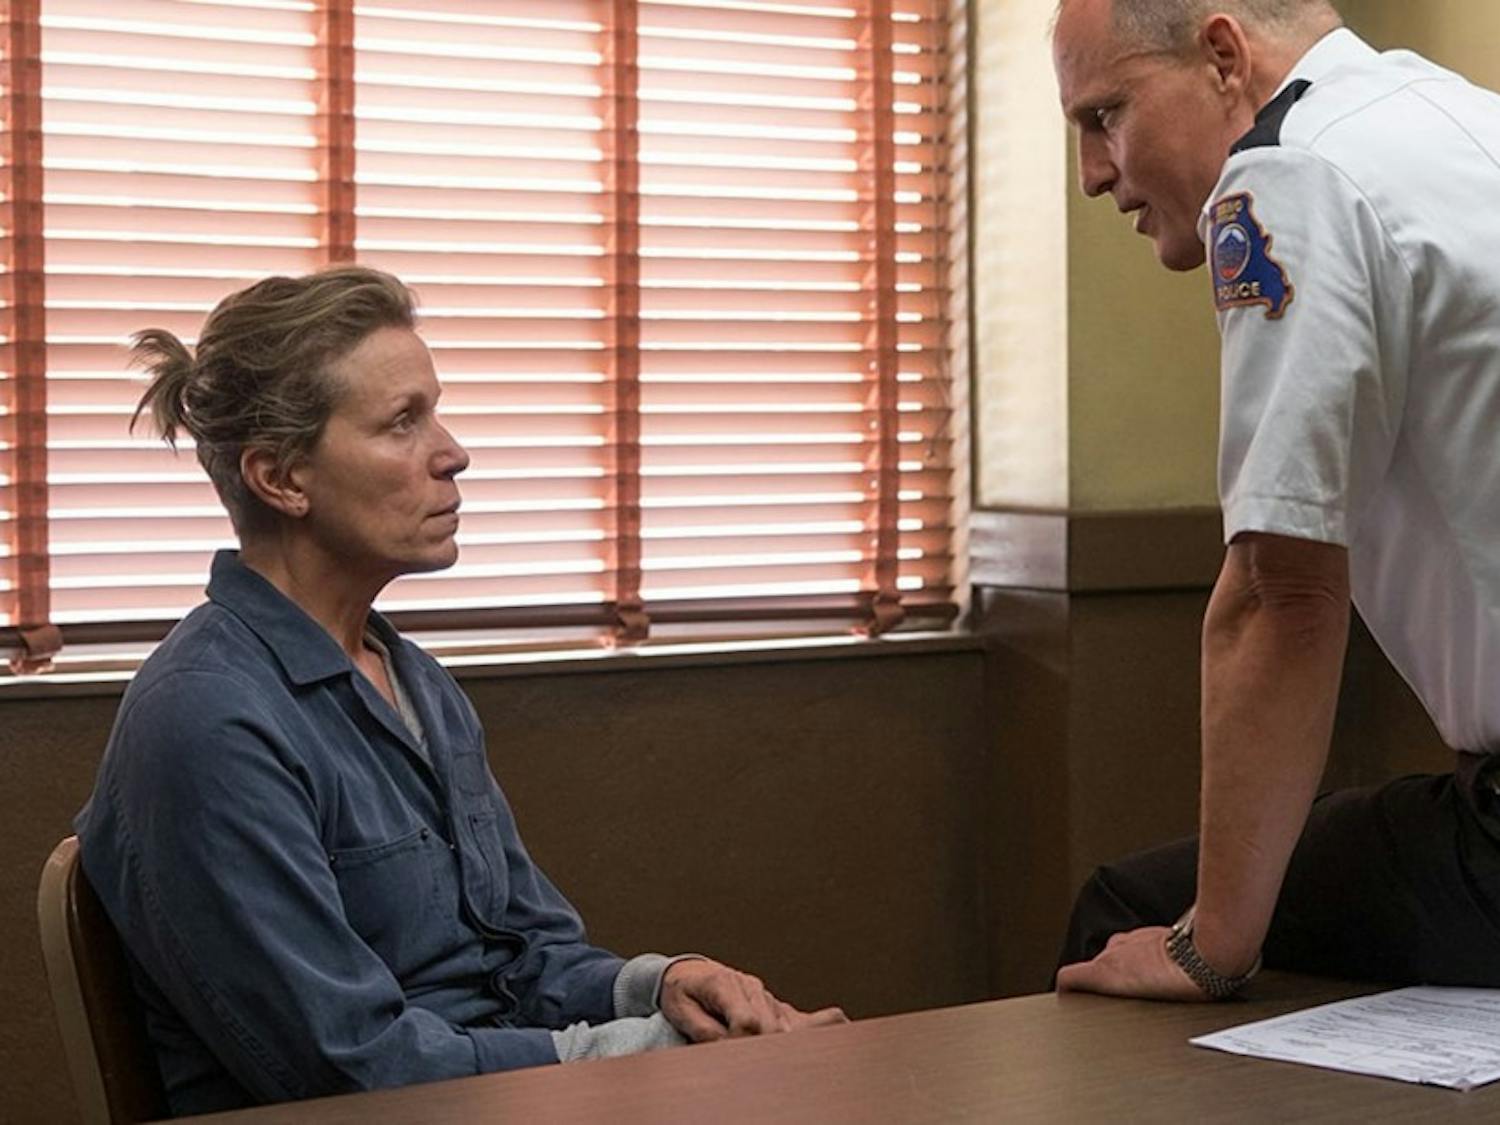 Frances McDormand and Woody Harrelson star in "Three Billboards Outside Ebbing, Missouri," which has showtimes at Durham's Carolina Theatre.